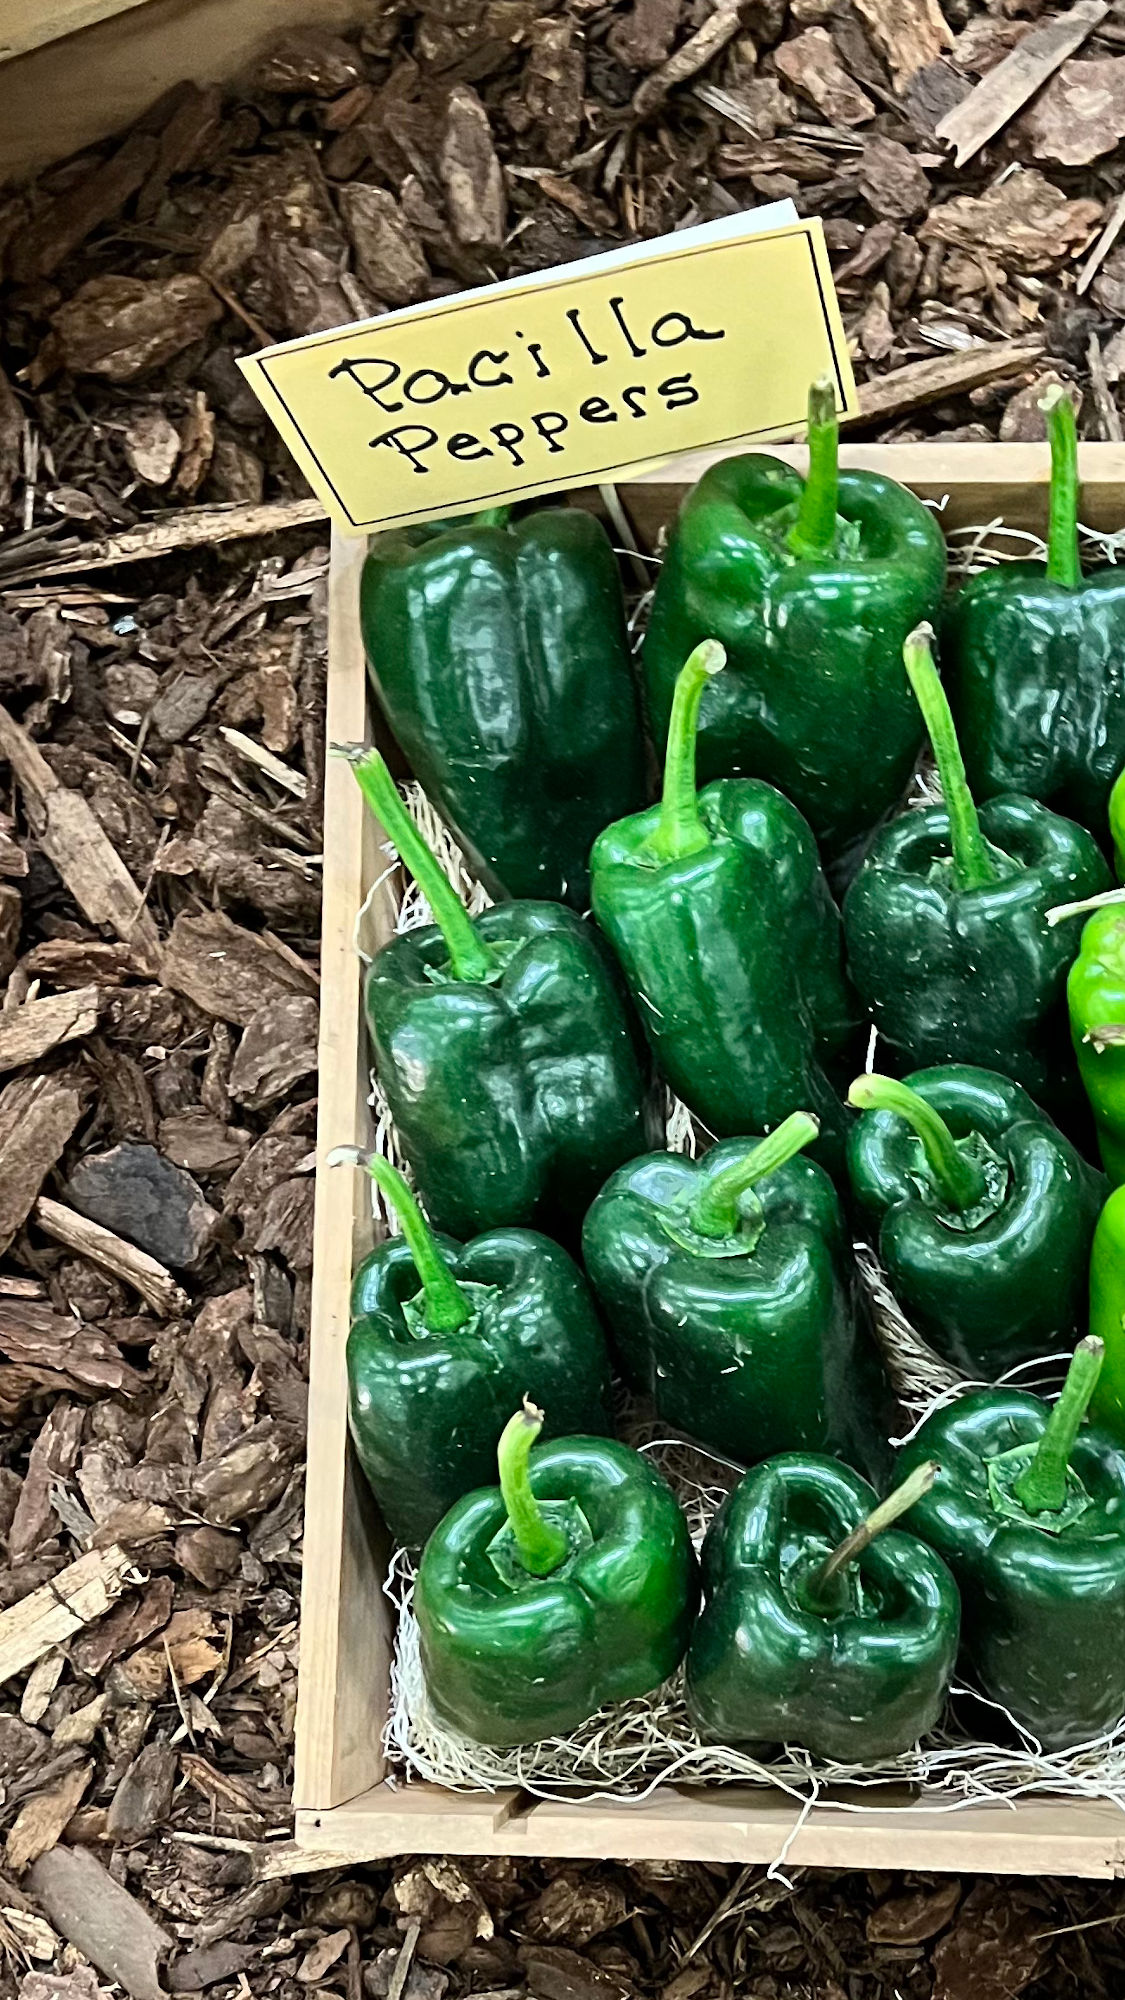 Underwood Family Farms Pacilla Peppers